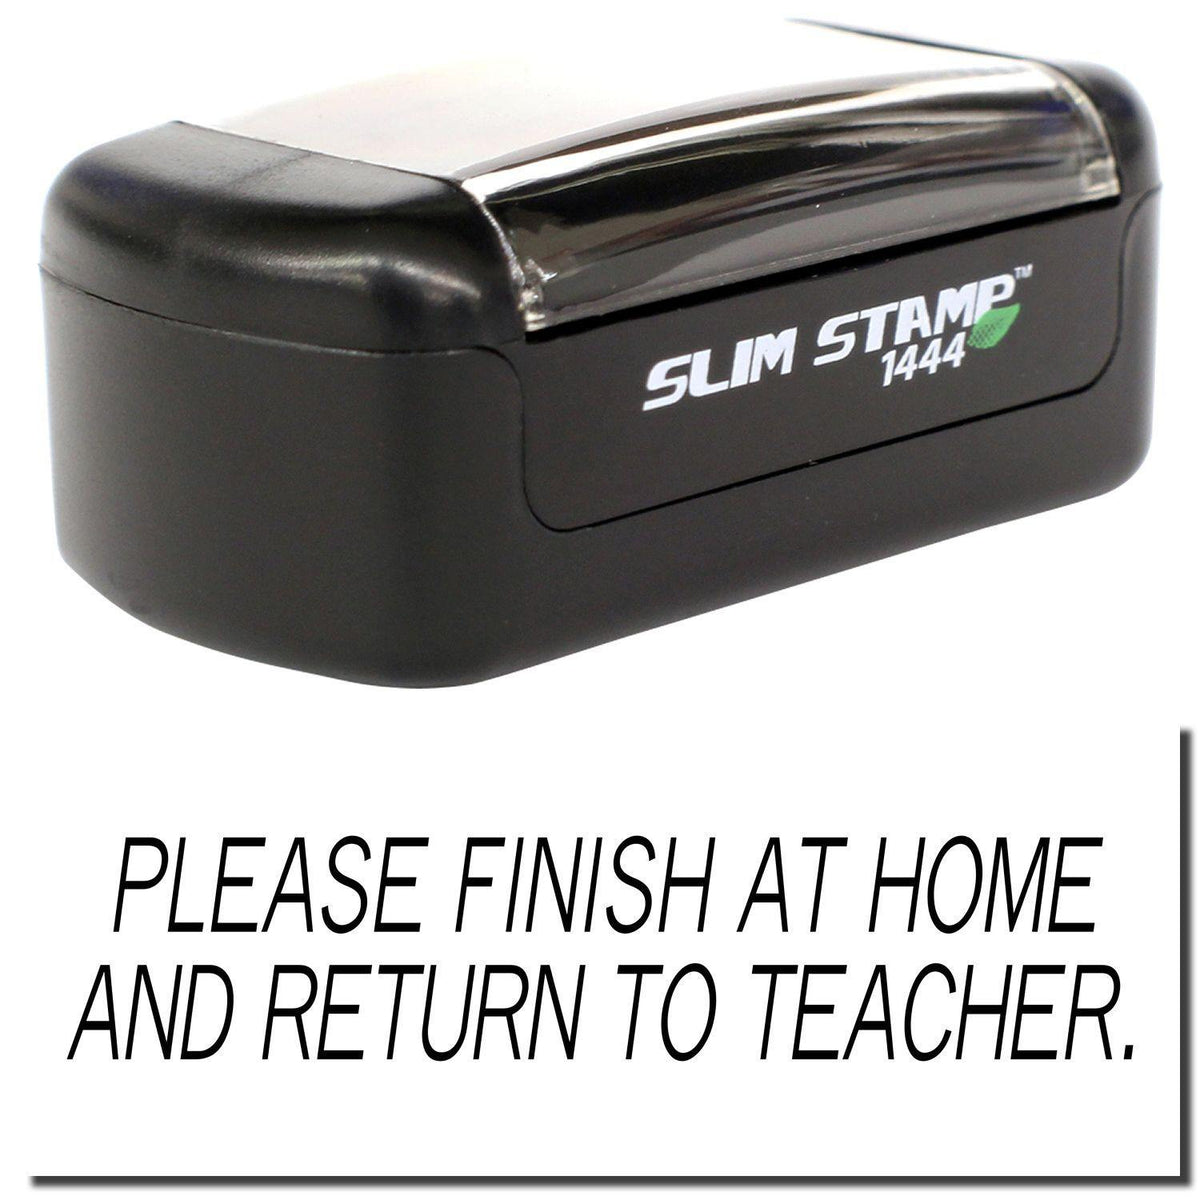 A stock office pre-inked stamp with a stamped image showing how the text &quot;PLEASE FINISH AT HOME AND RETURN TO TEACHER.&quot; is displayed after stamping.